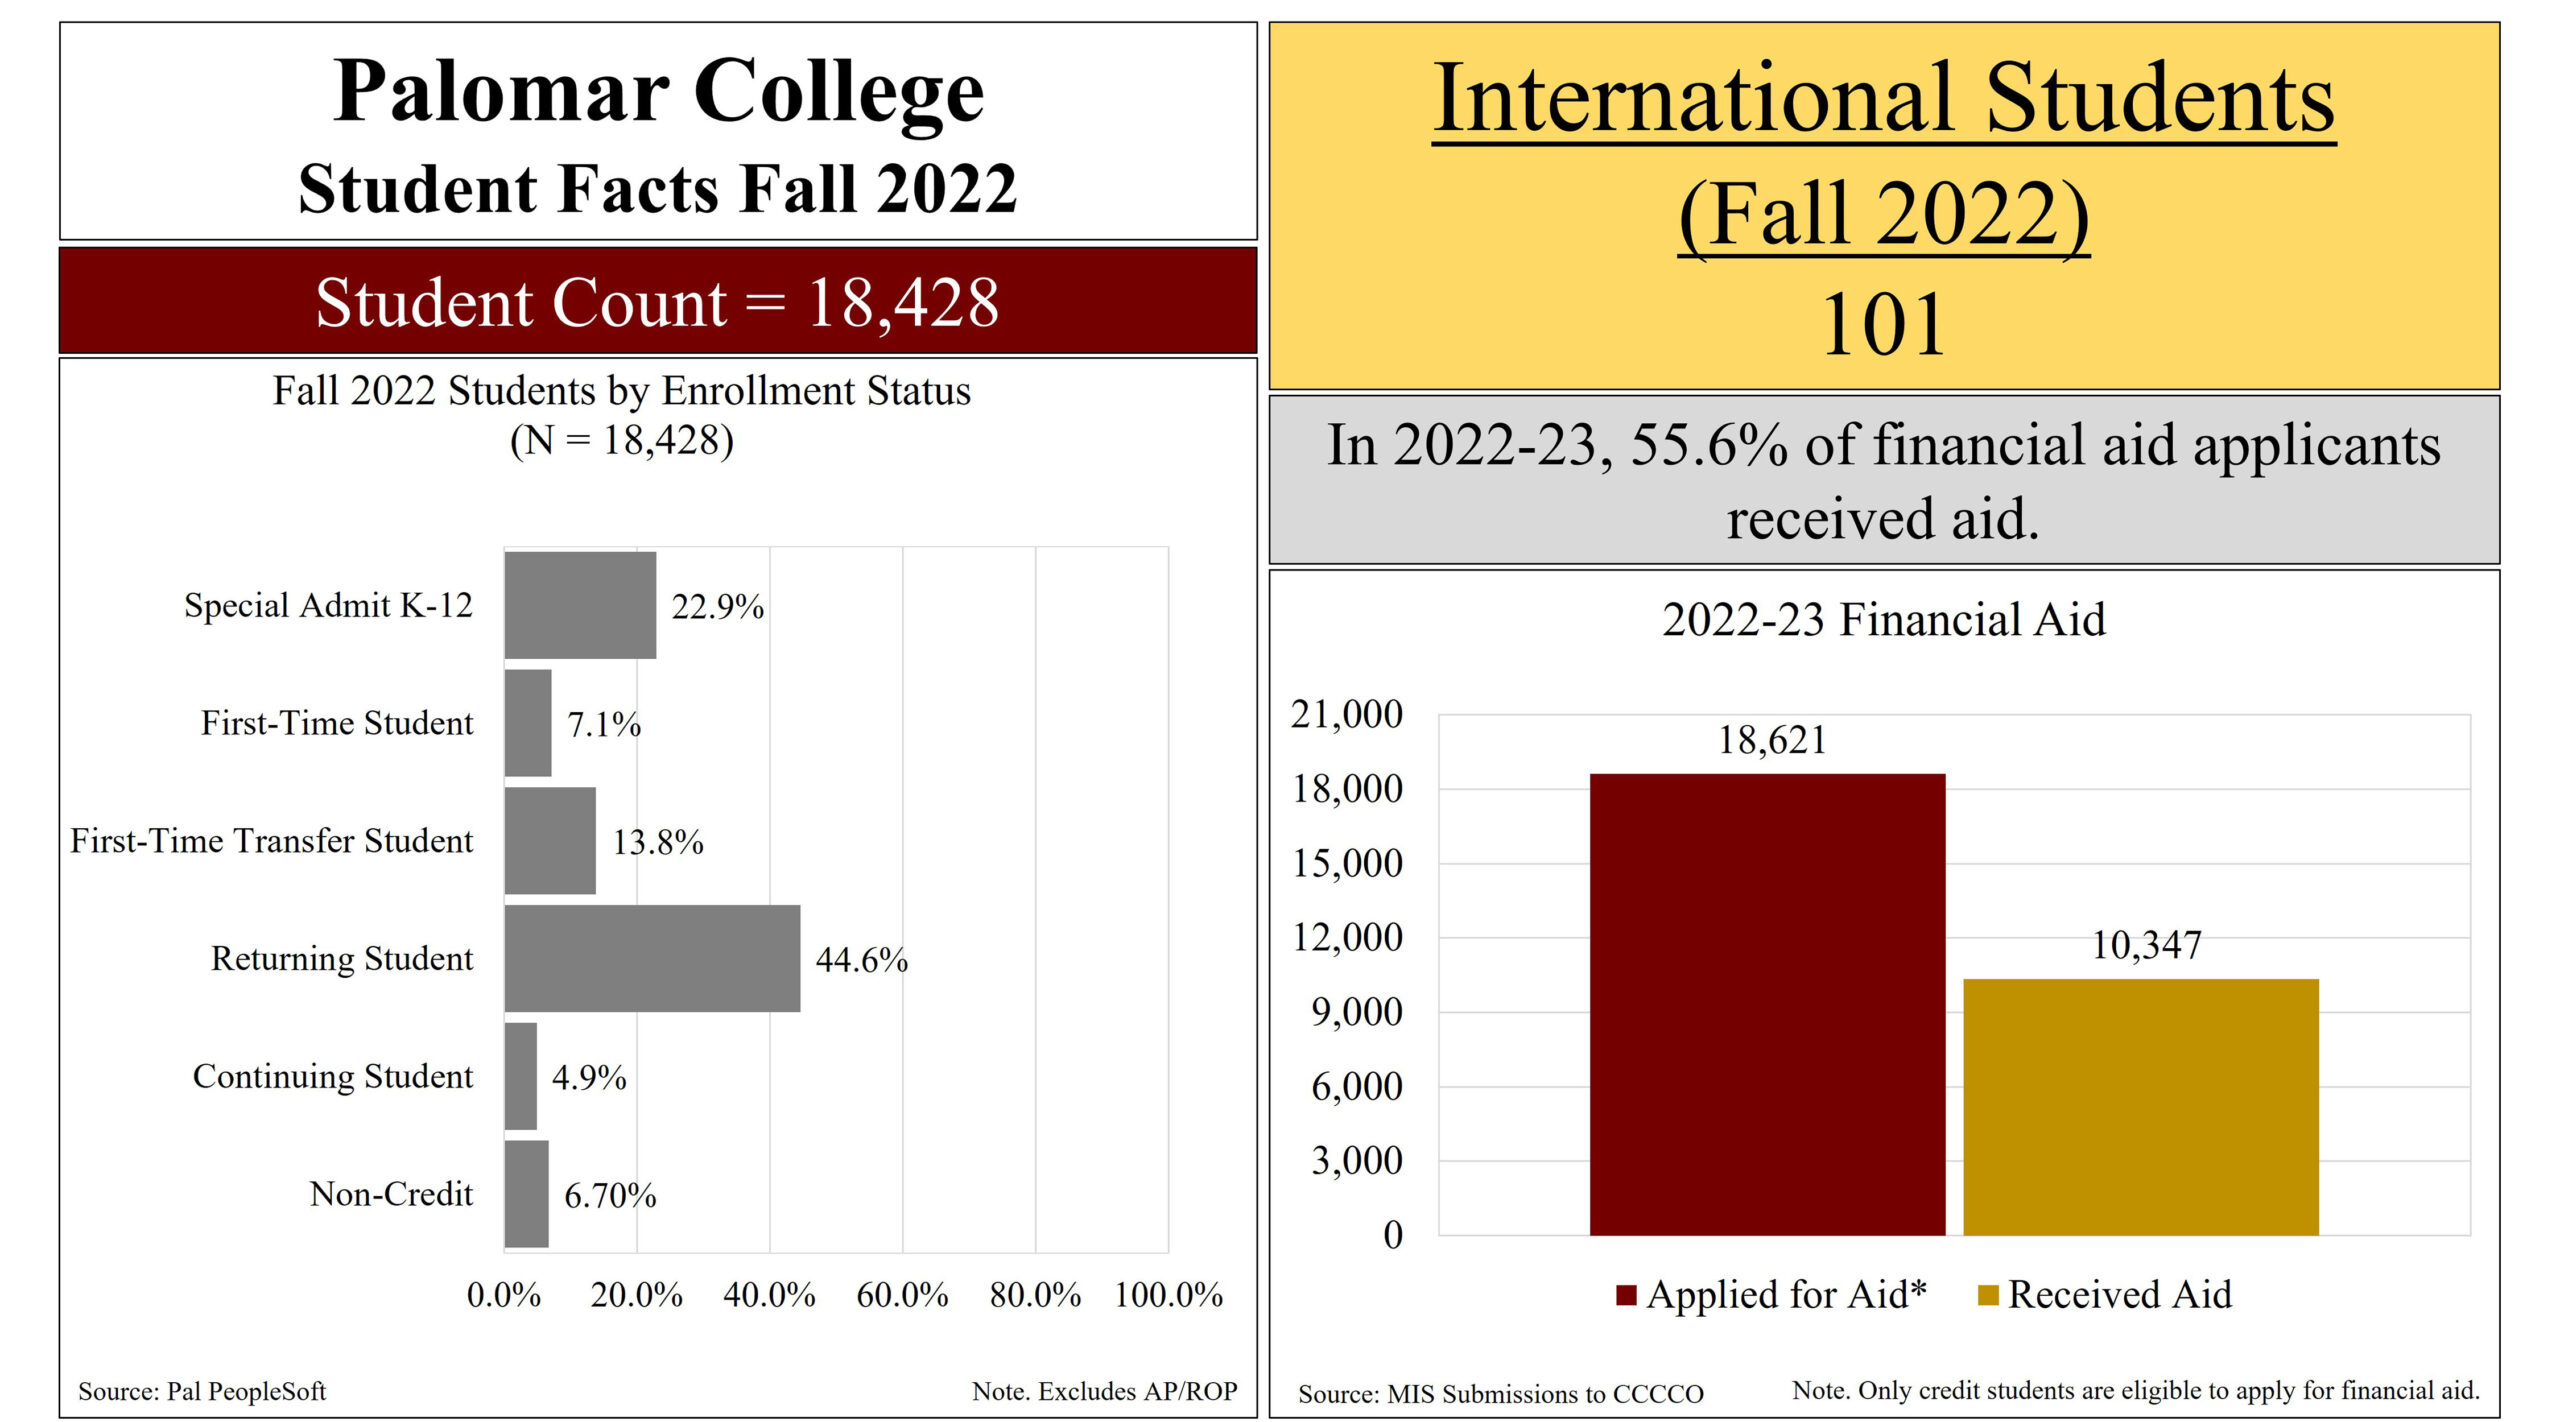 Presented Top to Bottom Banner: Palomar College Student Facts Fall 2022 Student Count = 18,428 Chart - Fall 2022 Students by Enrollment Status Enrollment Status % Special Admit K-12 22.9% First-Time Student 7.1% First-Time Transfer Student 13.8% Returning Student 44.6% Continuing Student 4.9% Non-Credit 6.7% Text Box - International Students (Fall 2022) 101 Text Box - In 2022-23, 55.6% of financial aid applicants received aid. Chart - 2022-23 Financial Aid Applied for Aid* - 18,621 Note*. Only credit students are eligible to apply for financial aid. Received Aid - 10,347 Source: MIS Submissions to CCCCO Source: Pal PeopleSoft Note. Excludes AP/ROP